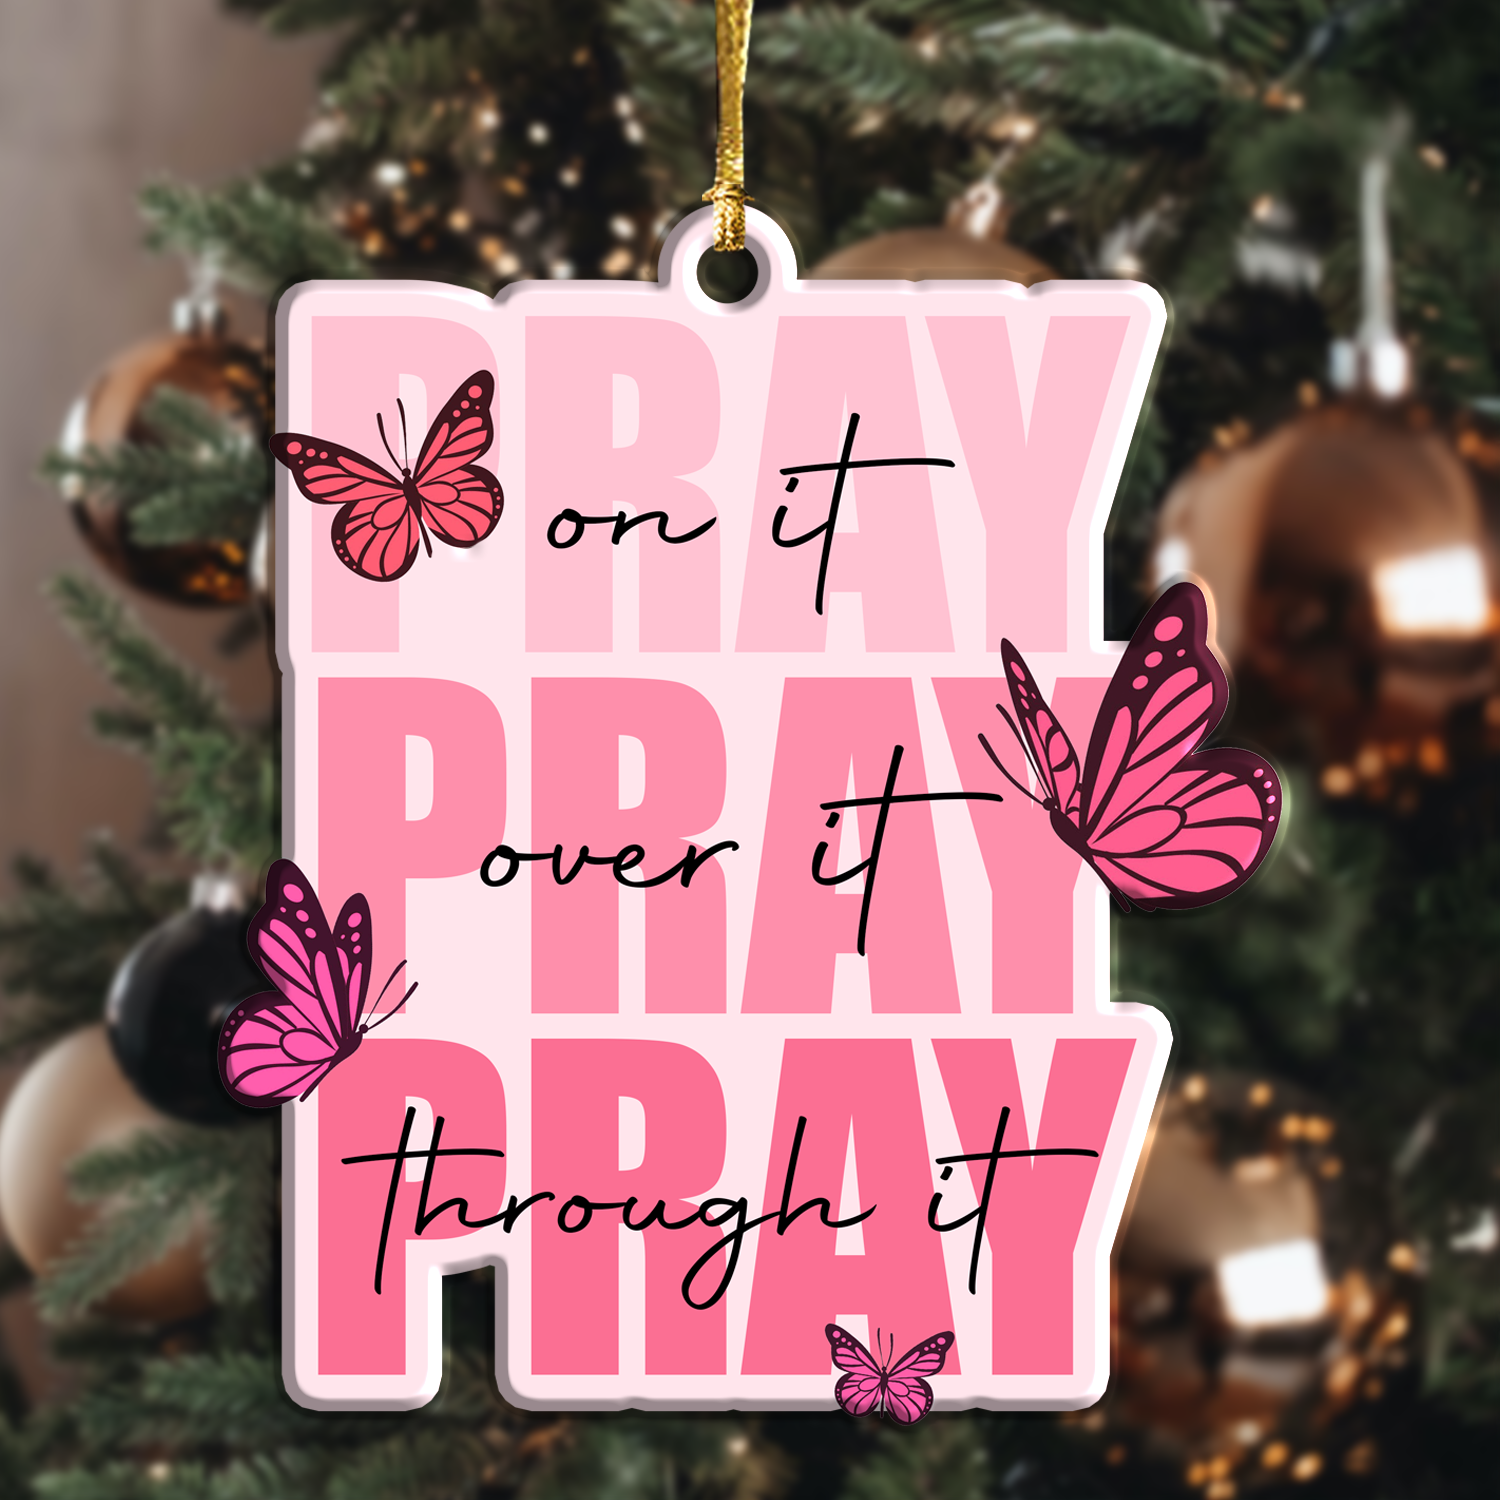 Pray On It Pray Over It Pray Through It Pink Butterflies Christian Ornament Gift Christmas Ornament Car Hanging